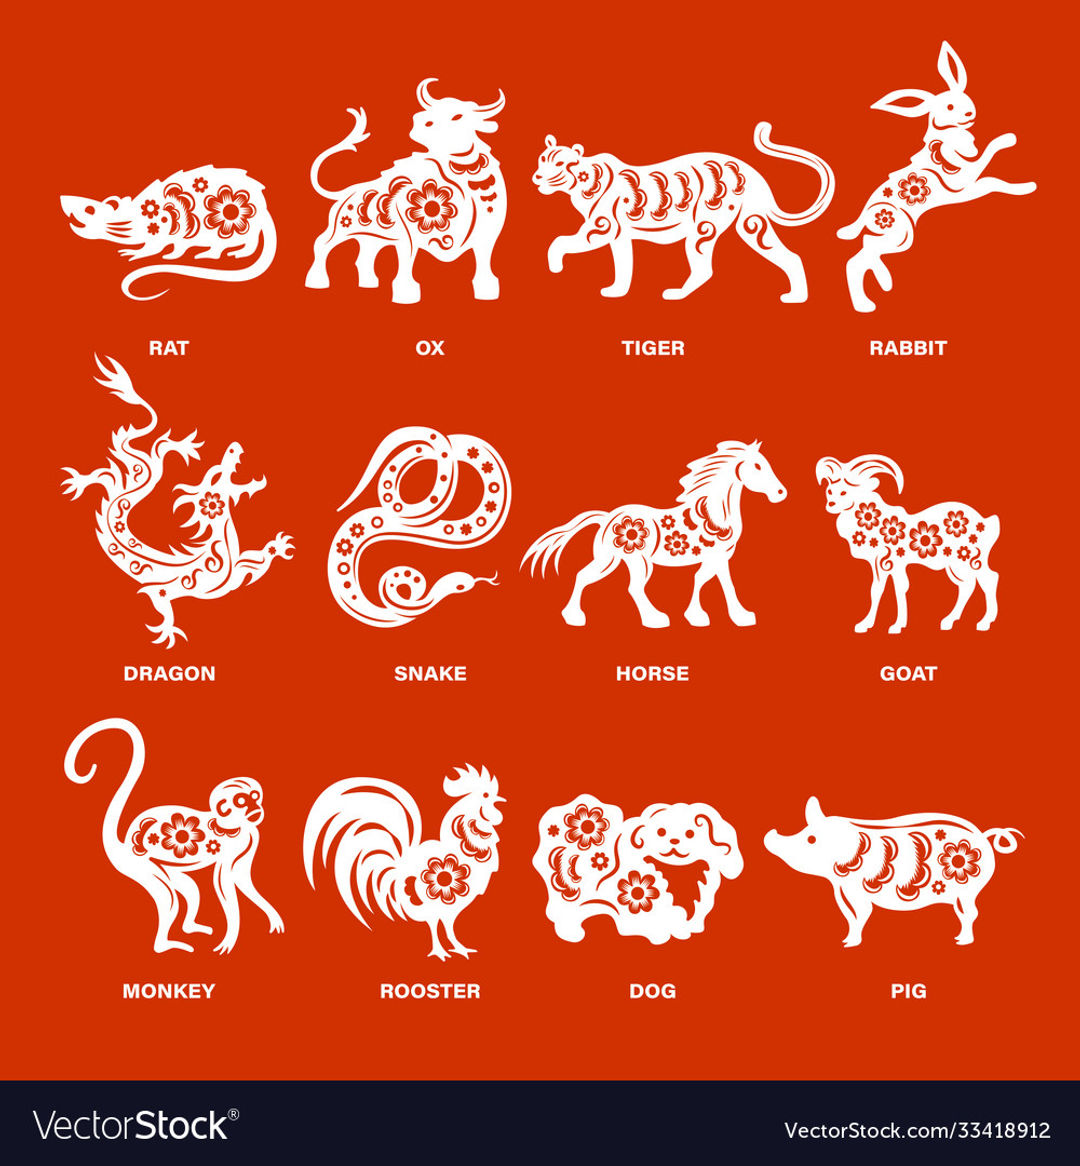 chinese-zodiac-signs-with-designation-vector-33418912.jpg